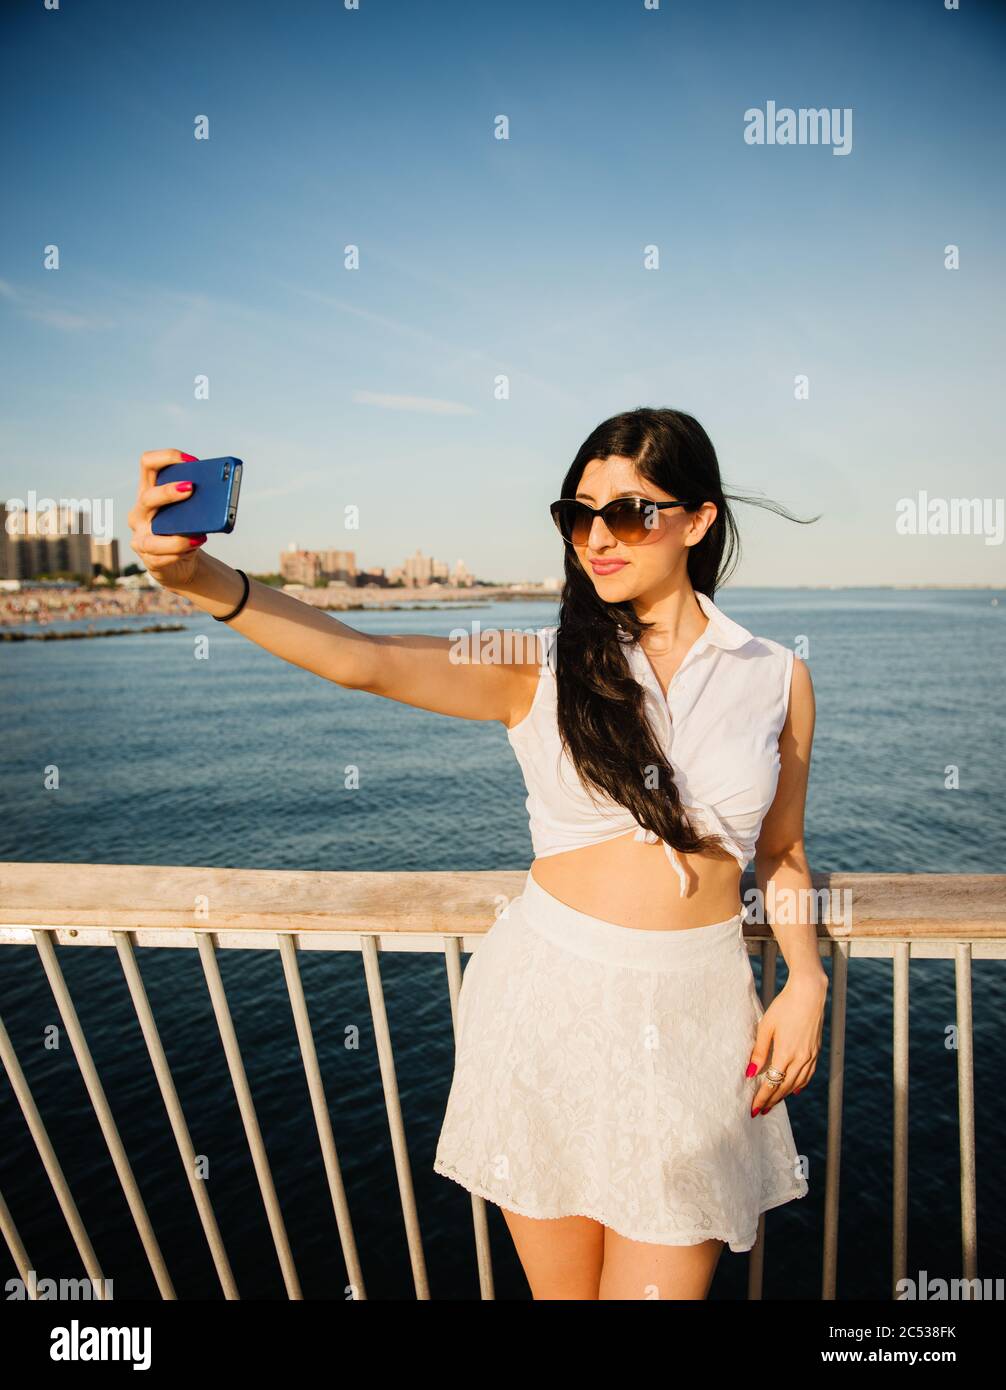 young woman taking a selfie on the beach Stock Photo